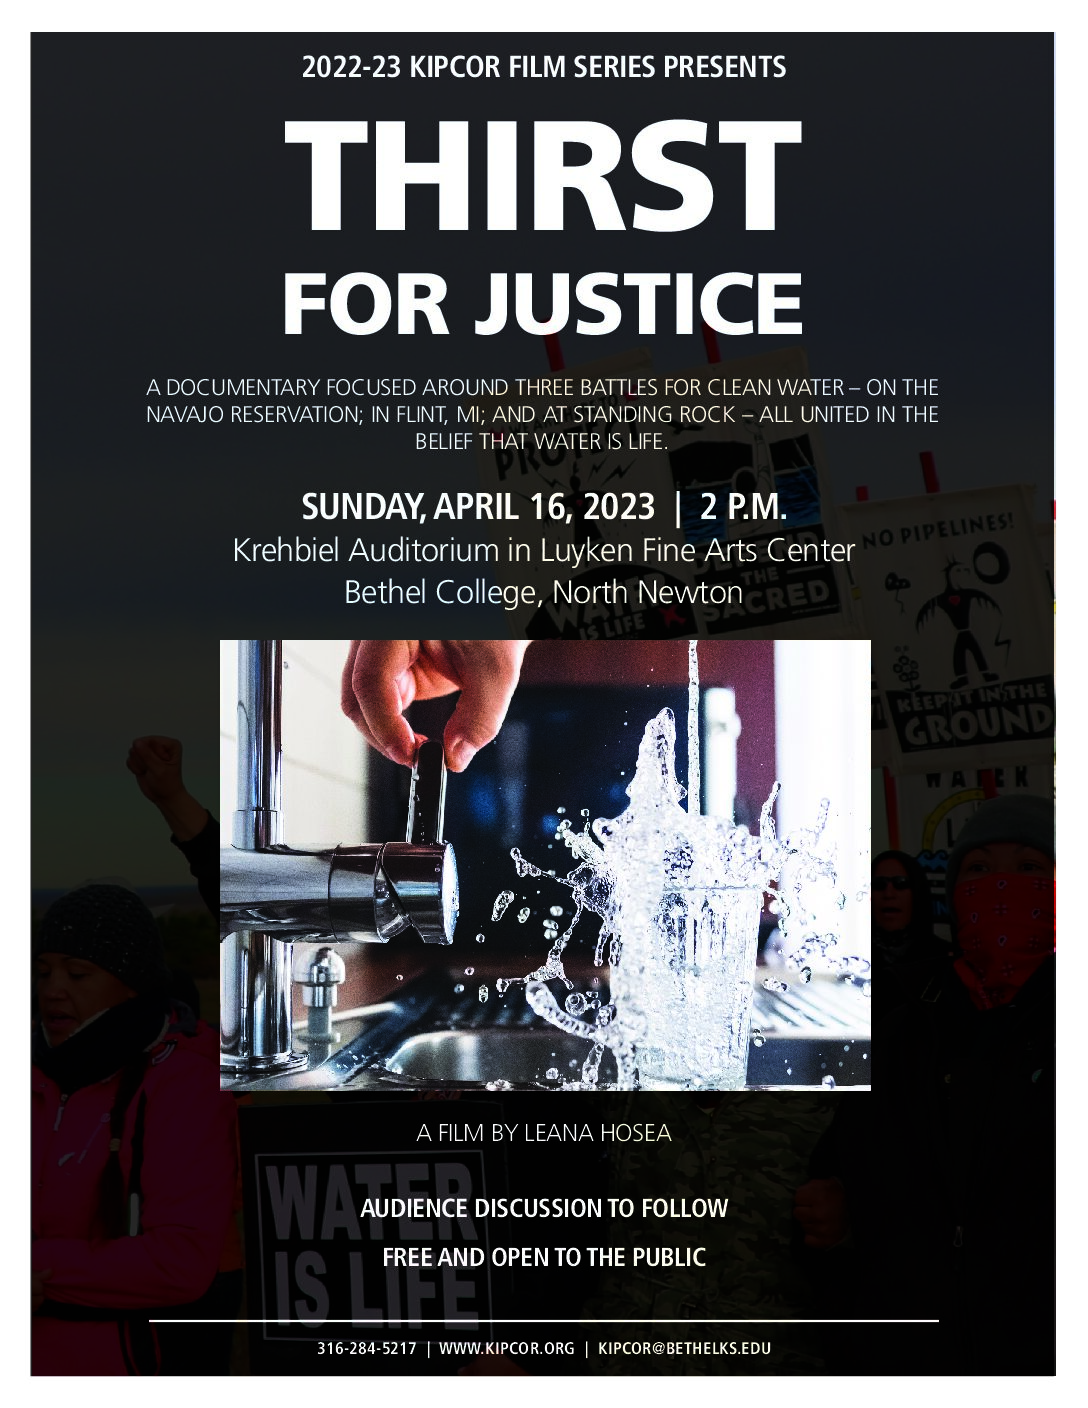 KIPCOR Film Series 2022-23 – Thirst For Justice